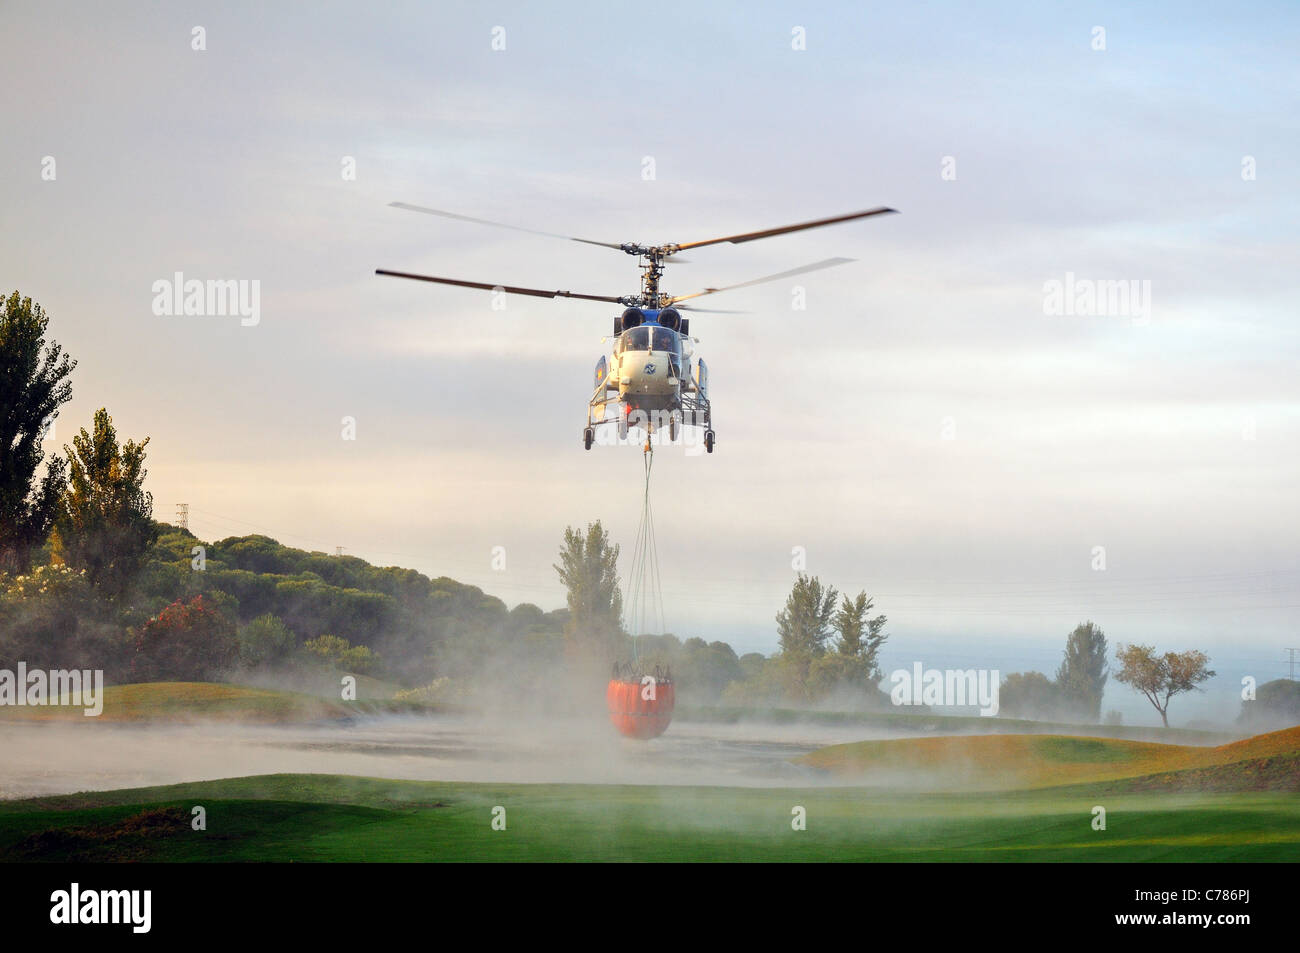 Kamov Ka-32A11BC helicopter collecting water, Cabopino Golf, Costa del Sol, Malaga Province, Andalucia, Spain, Western Europe. Stock Photo